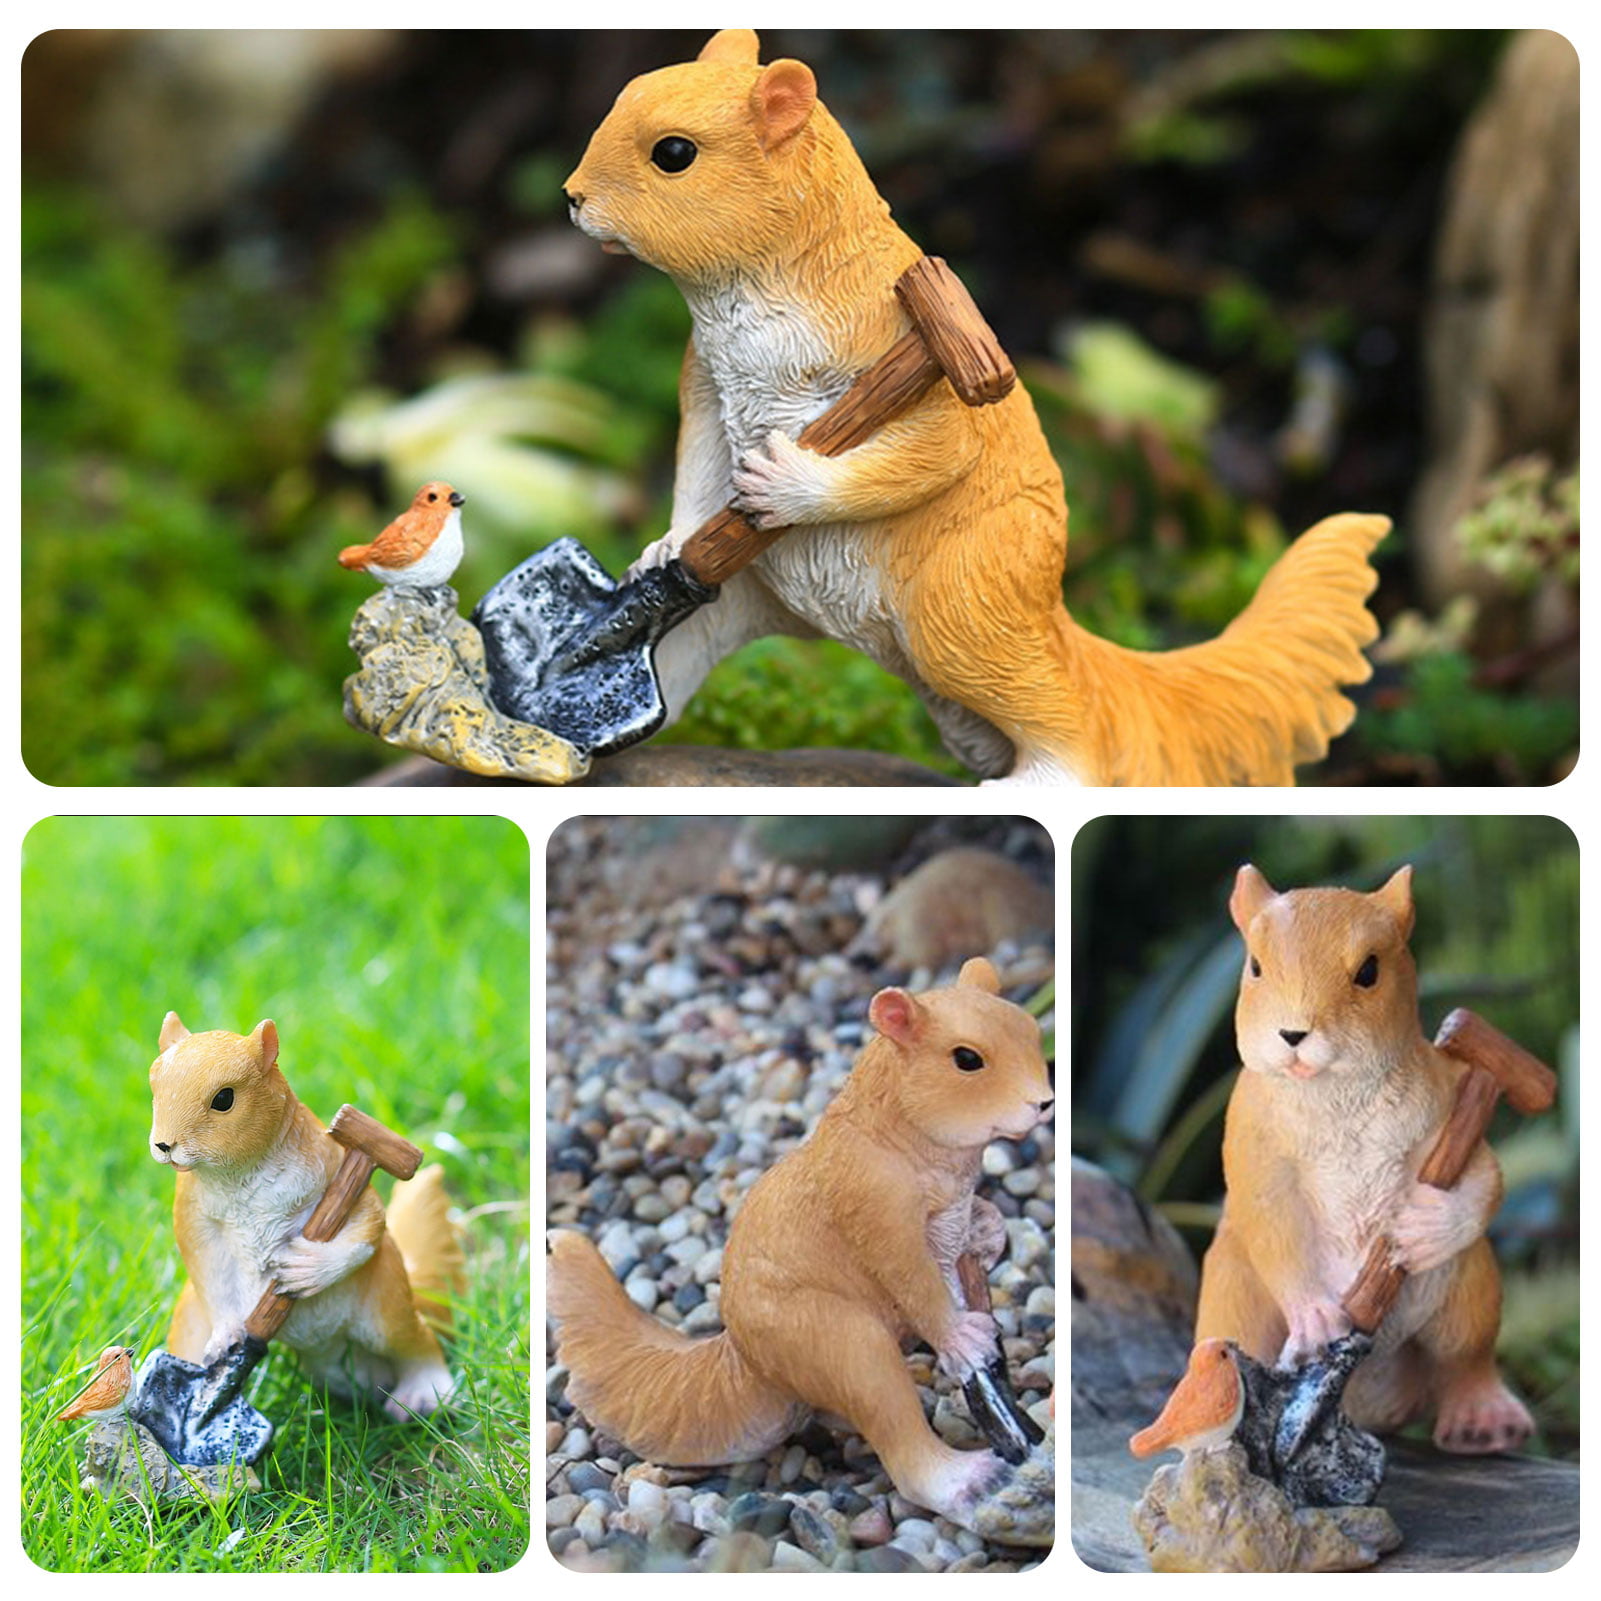 Red Squirrel Sculpture Nut Base Resin Garden Lawn Animal Ornaments Home Decor 